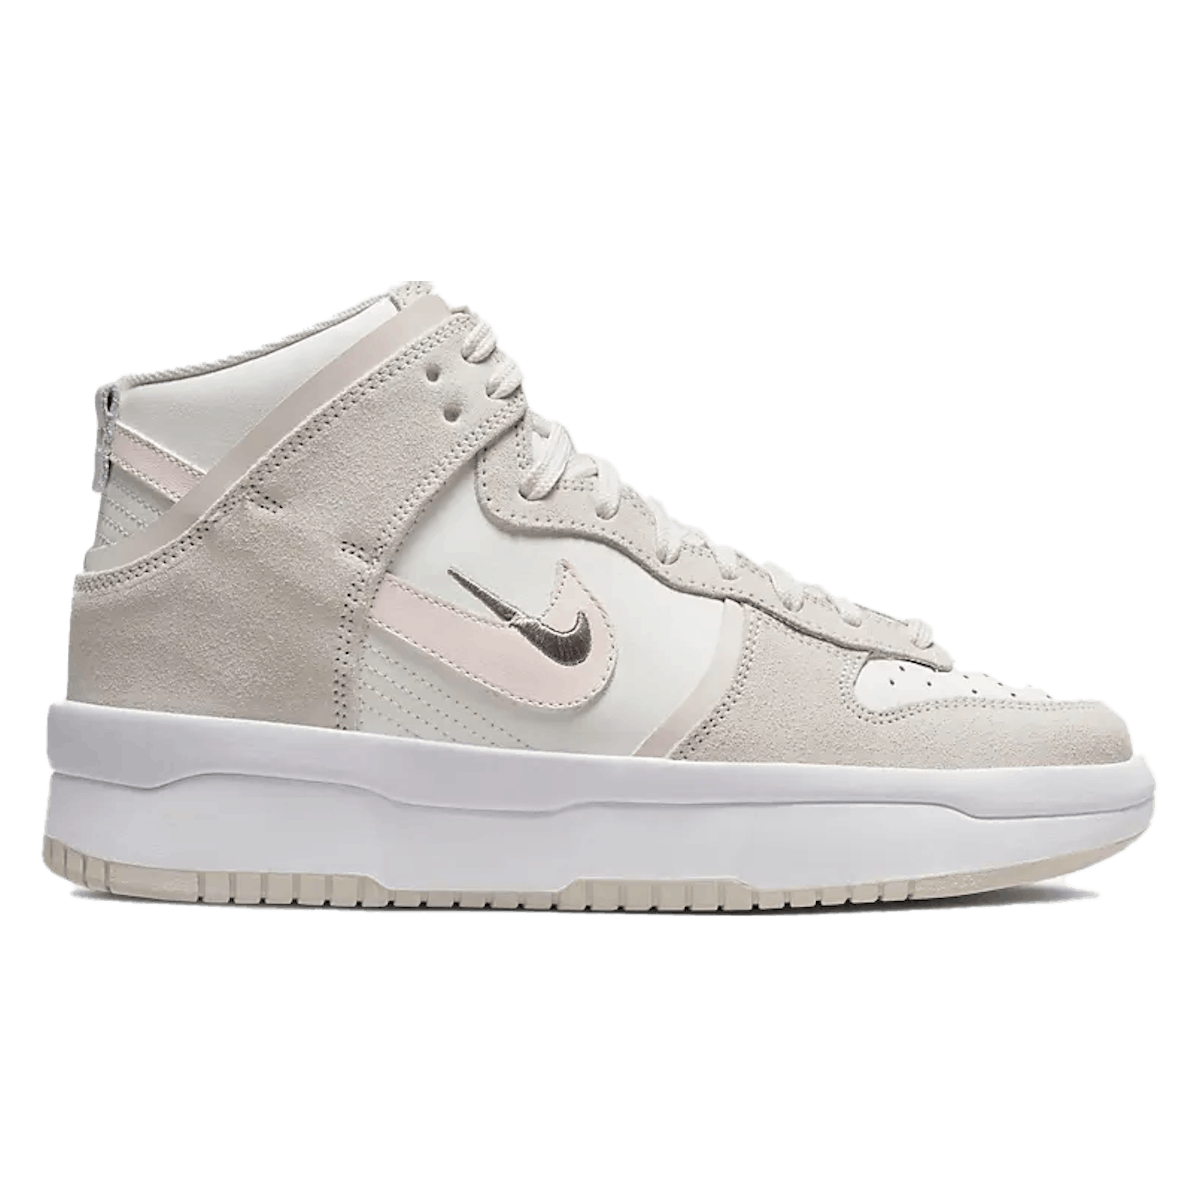 Nike Dunk High Up WMNS "Flat Pewter"